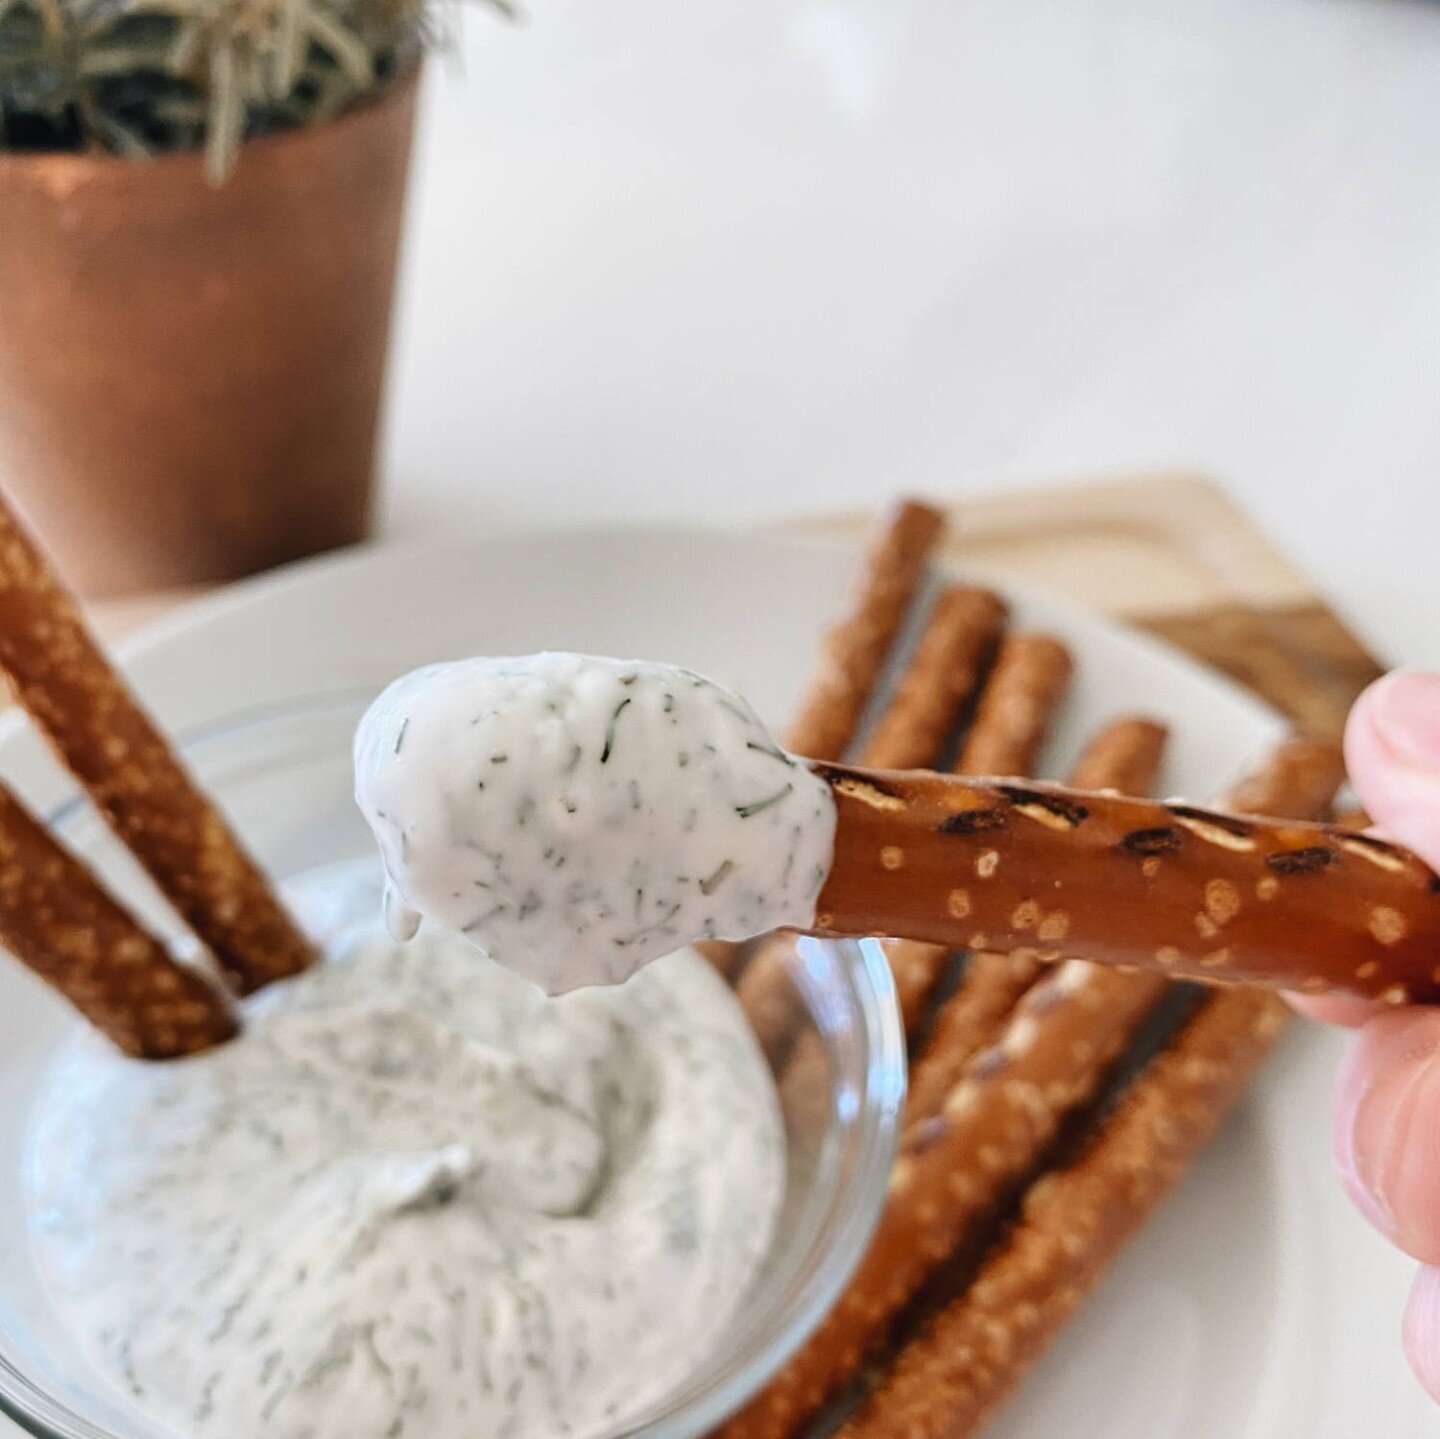 #WorldVeganDayChallenge - Day 14⁠
Category: Vegan Food⁠
⁠
You don&rsquo;t have to sacrifice creamy, delicious dips when you go vegan.⁠
⁠
Here&rsquo;s my Fast &amp; Easy Vegan Dill Dip for an easy but so delicious snack or veggie tray accompaniment.⁠
